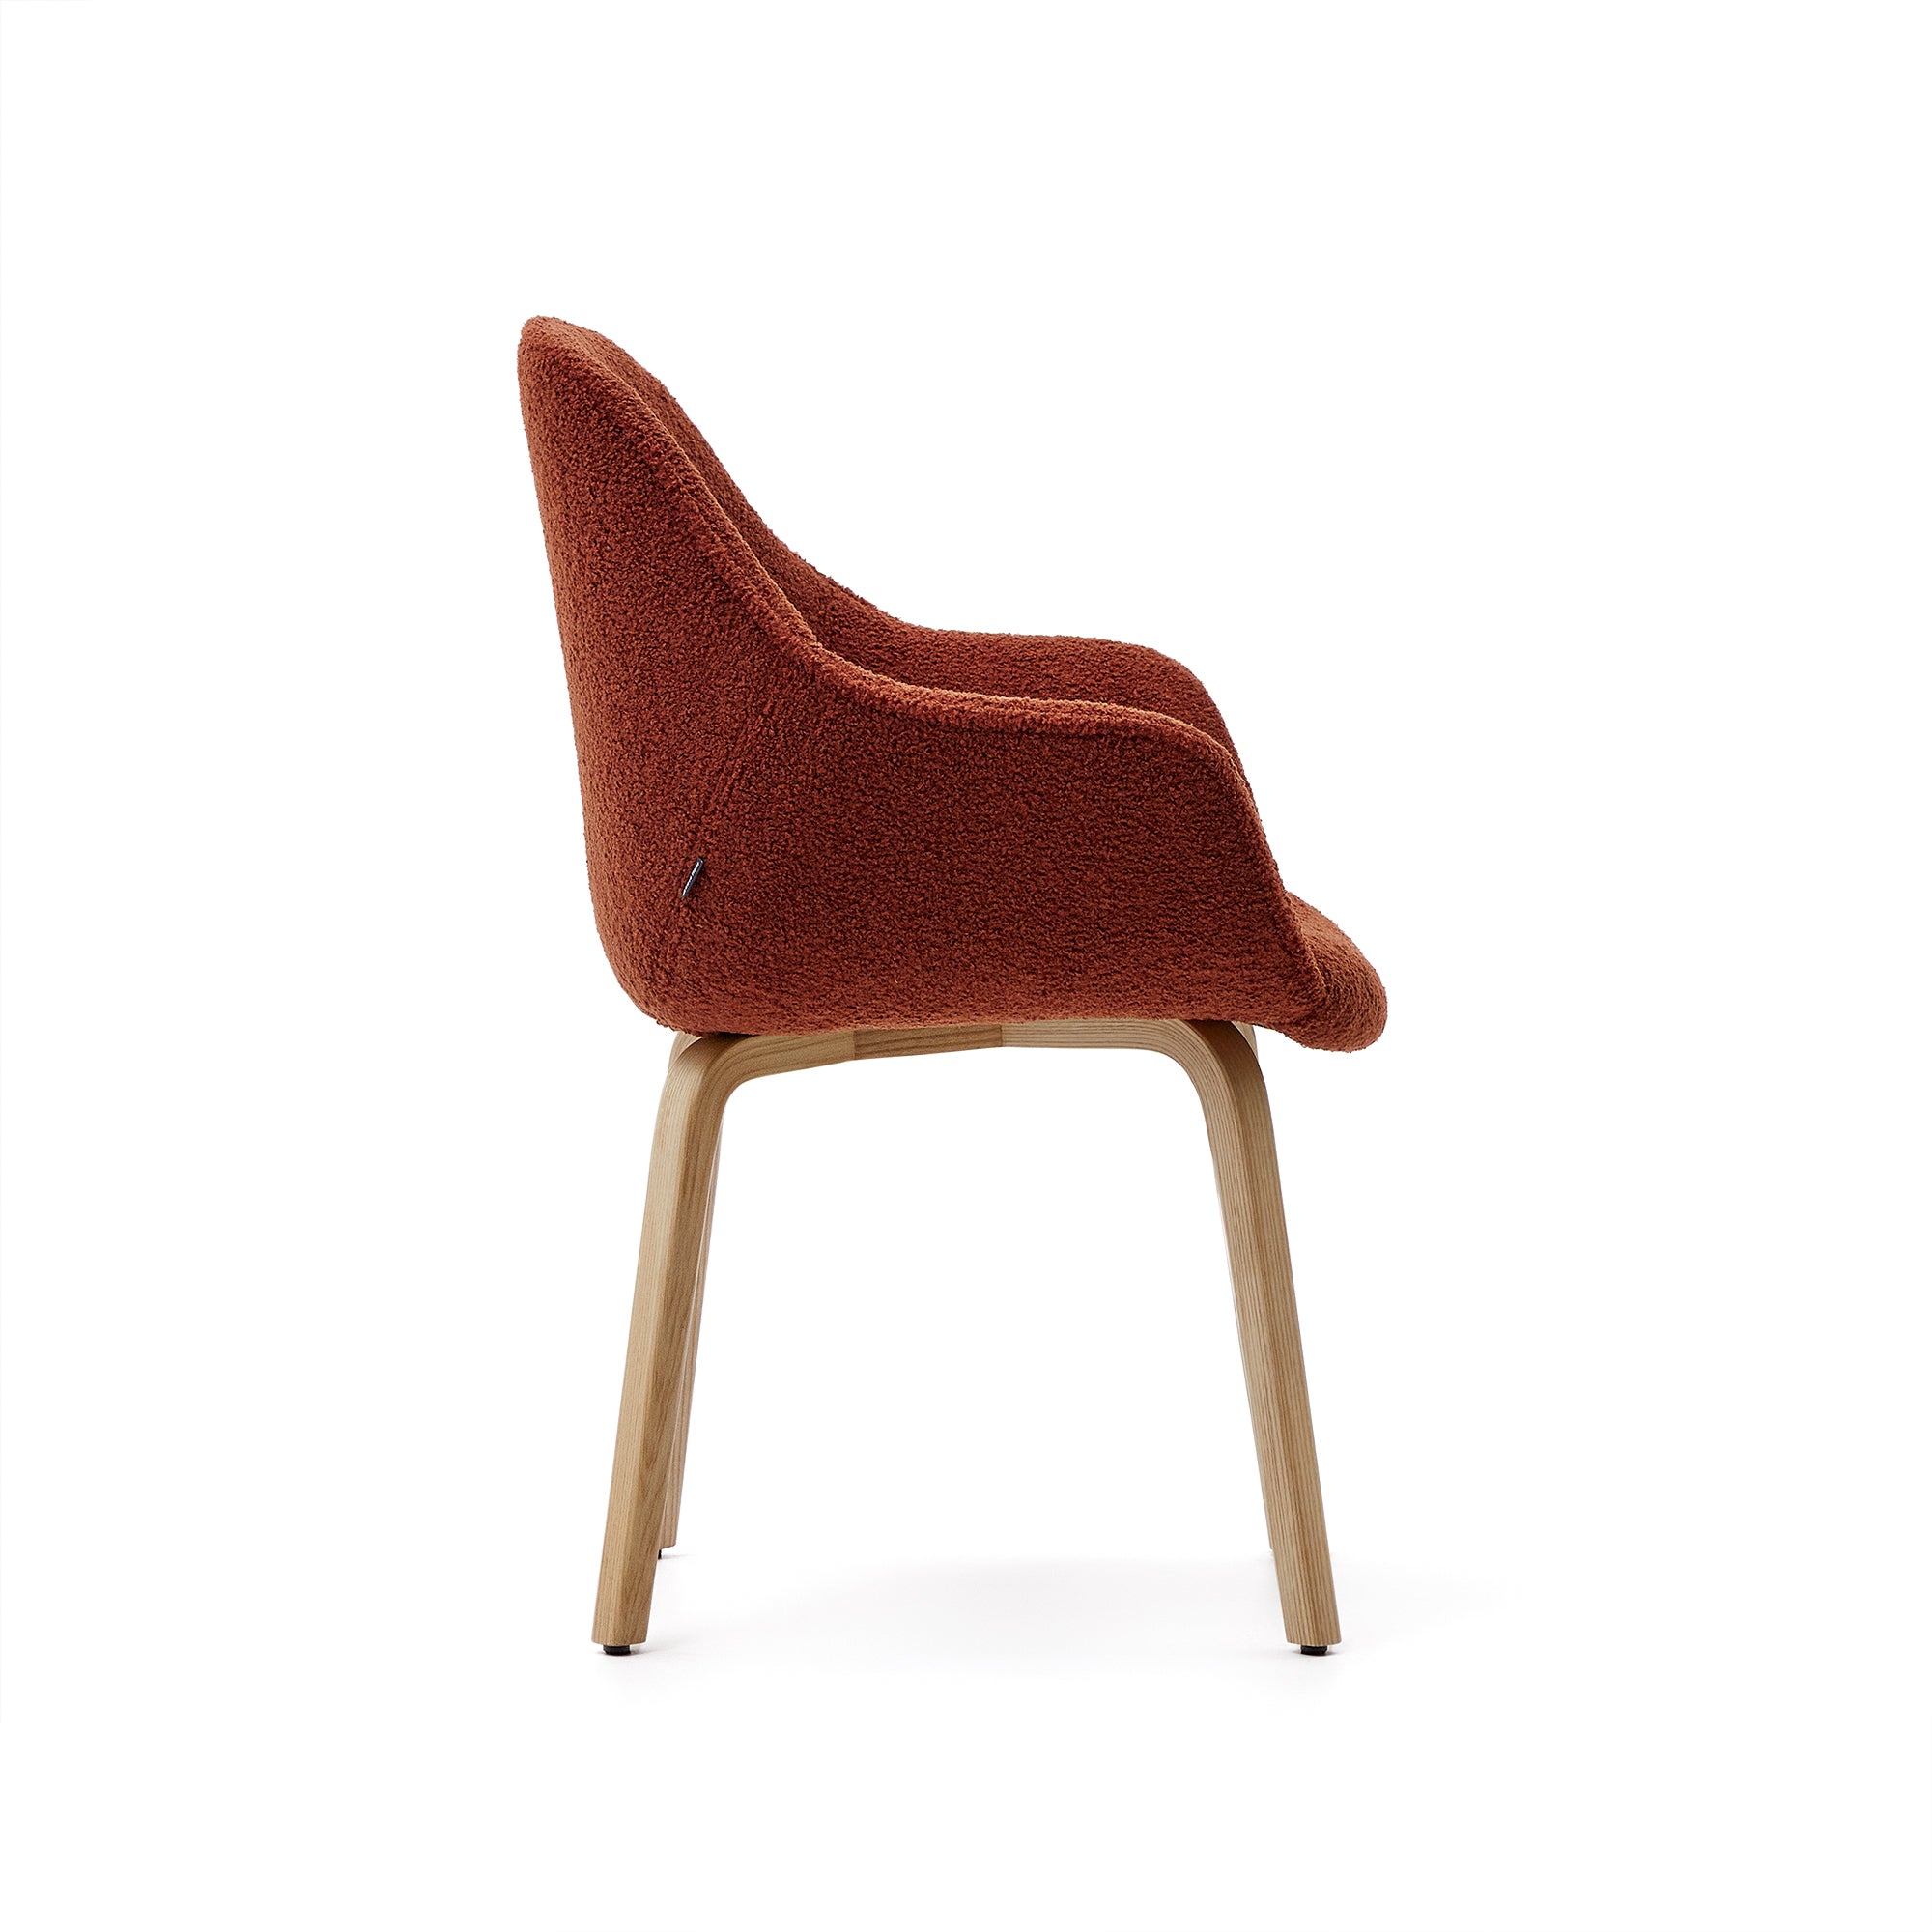 Aleli chair in terracota shearling with solid ash wood legs and natural finish